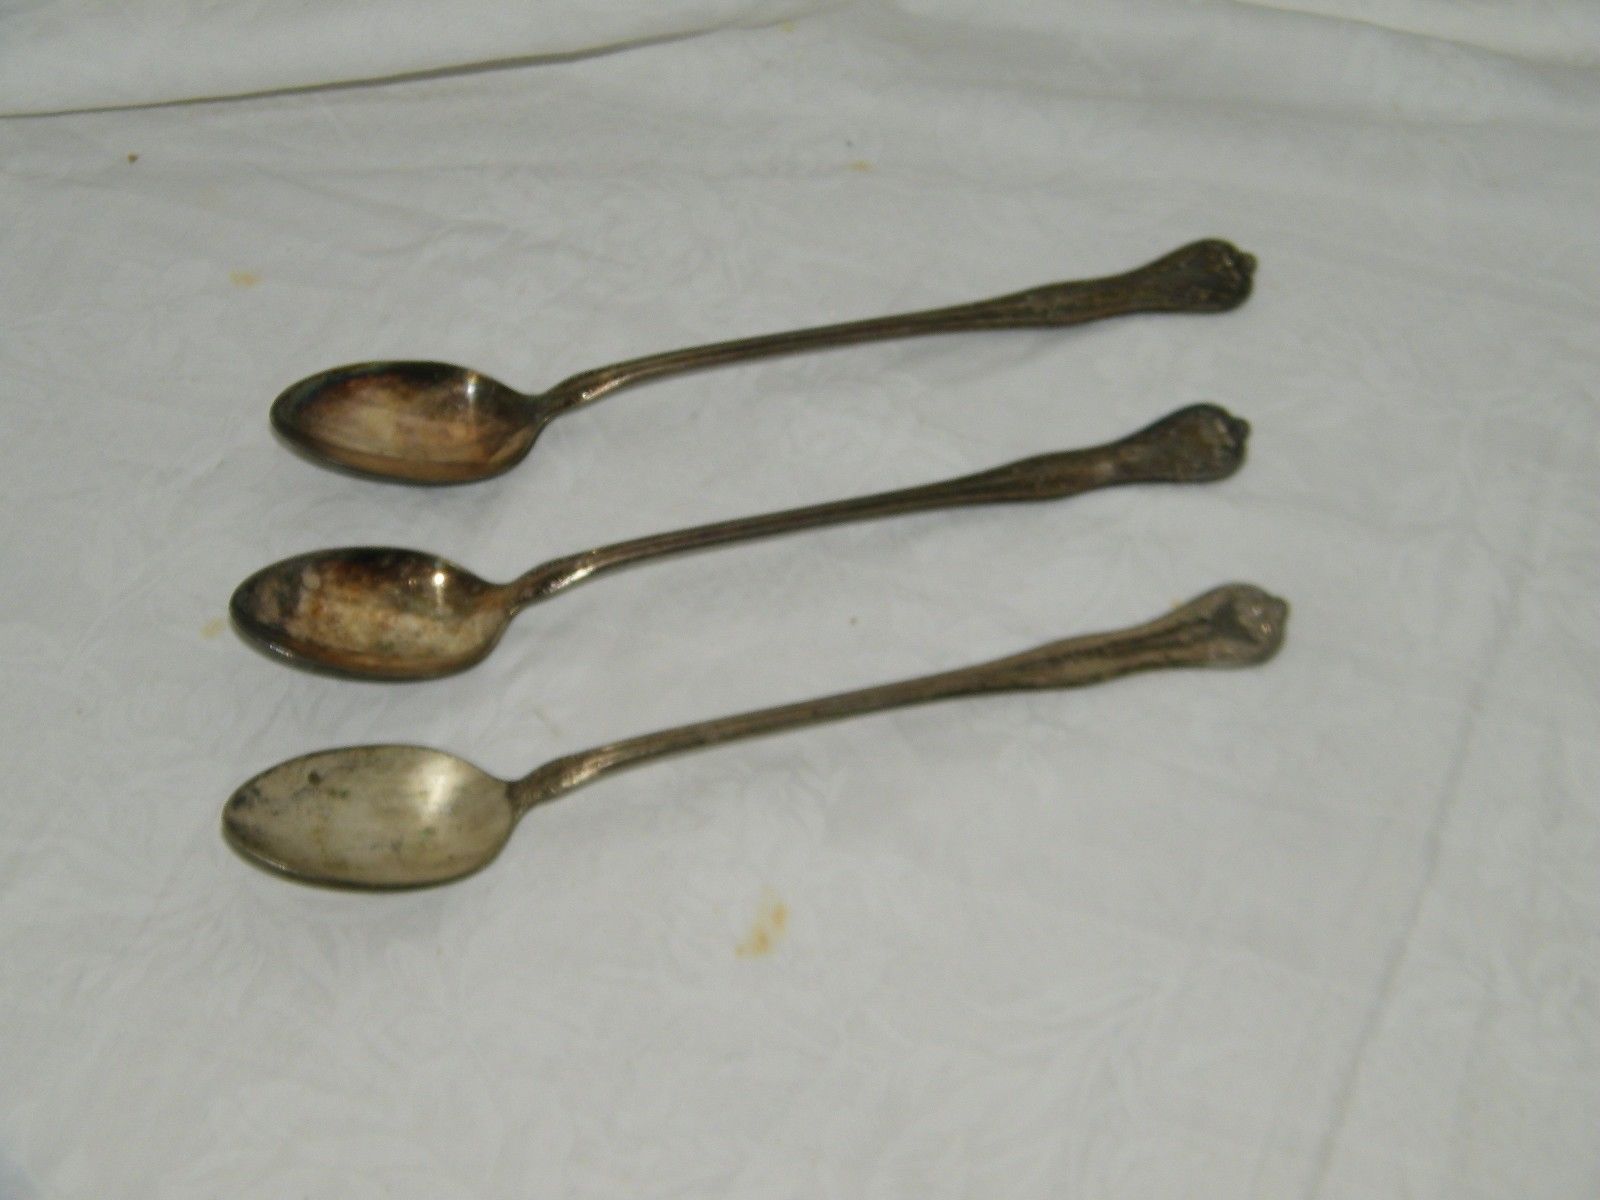 Primary image for 3 QUEEN ELIZABETH NATIONAL SILVERPLATE ICED TEA PARFAIT SPOON 18605 Spoons